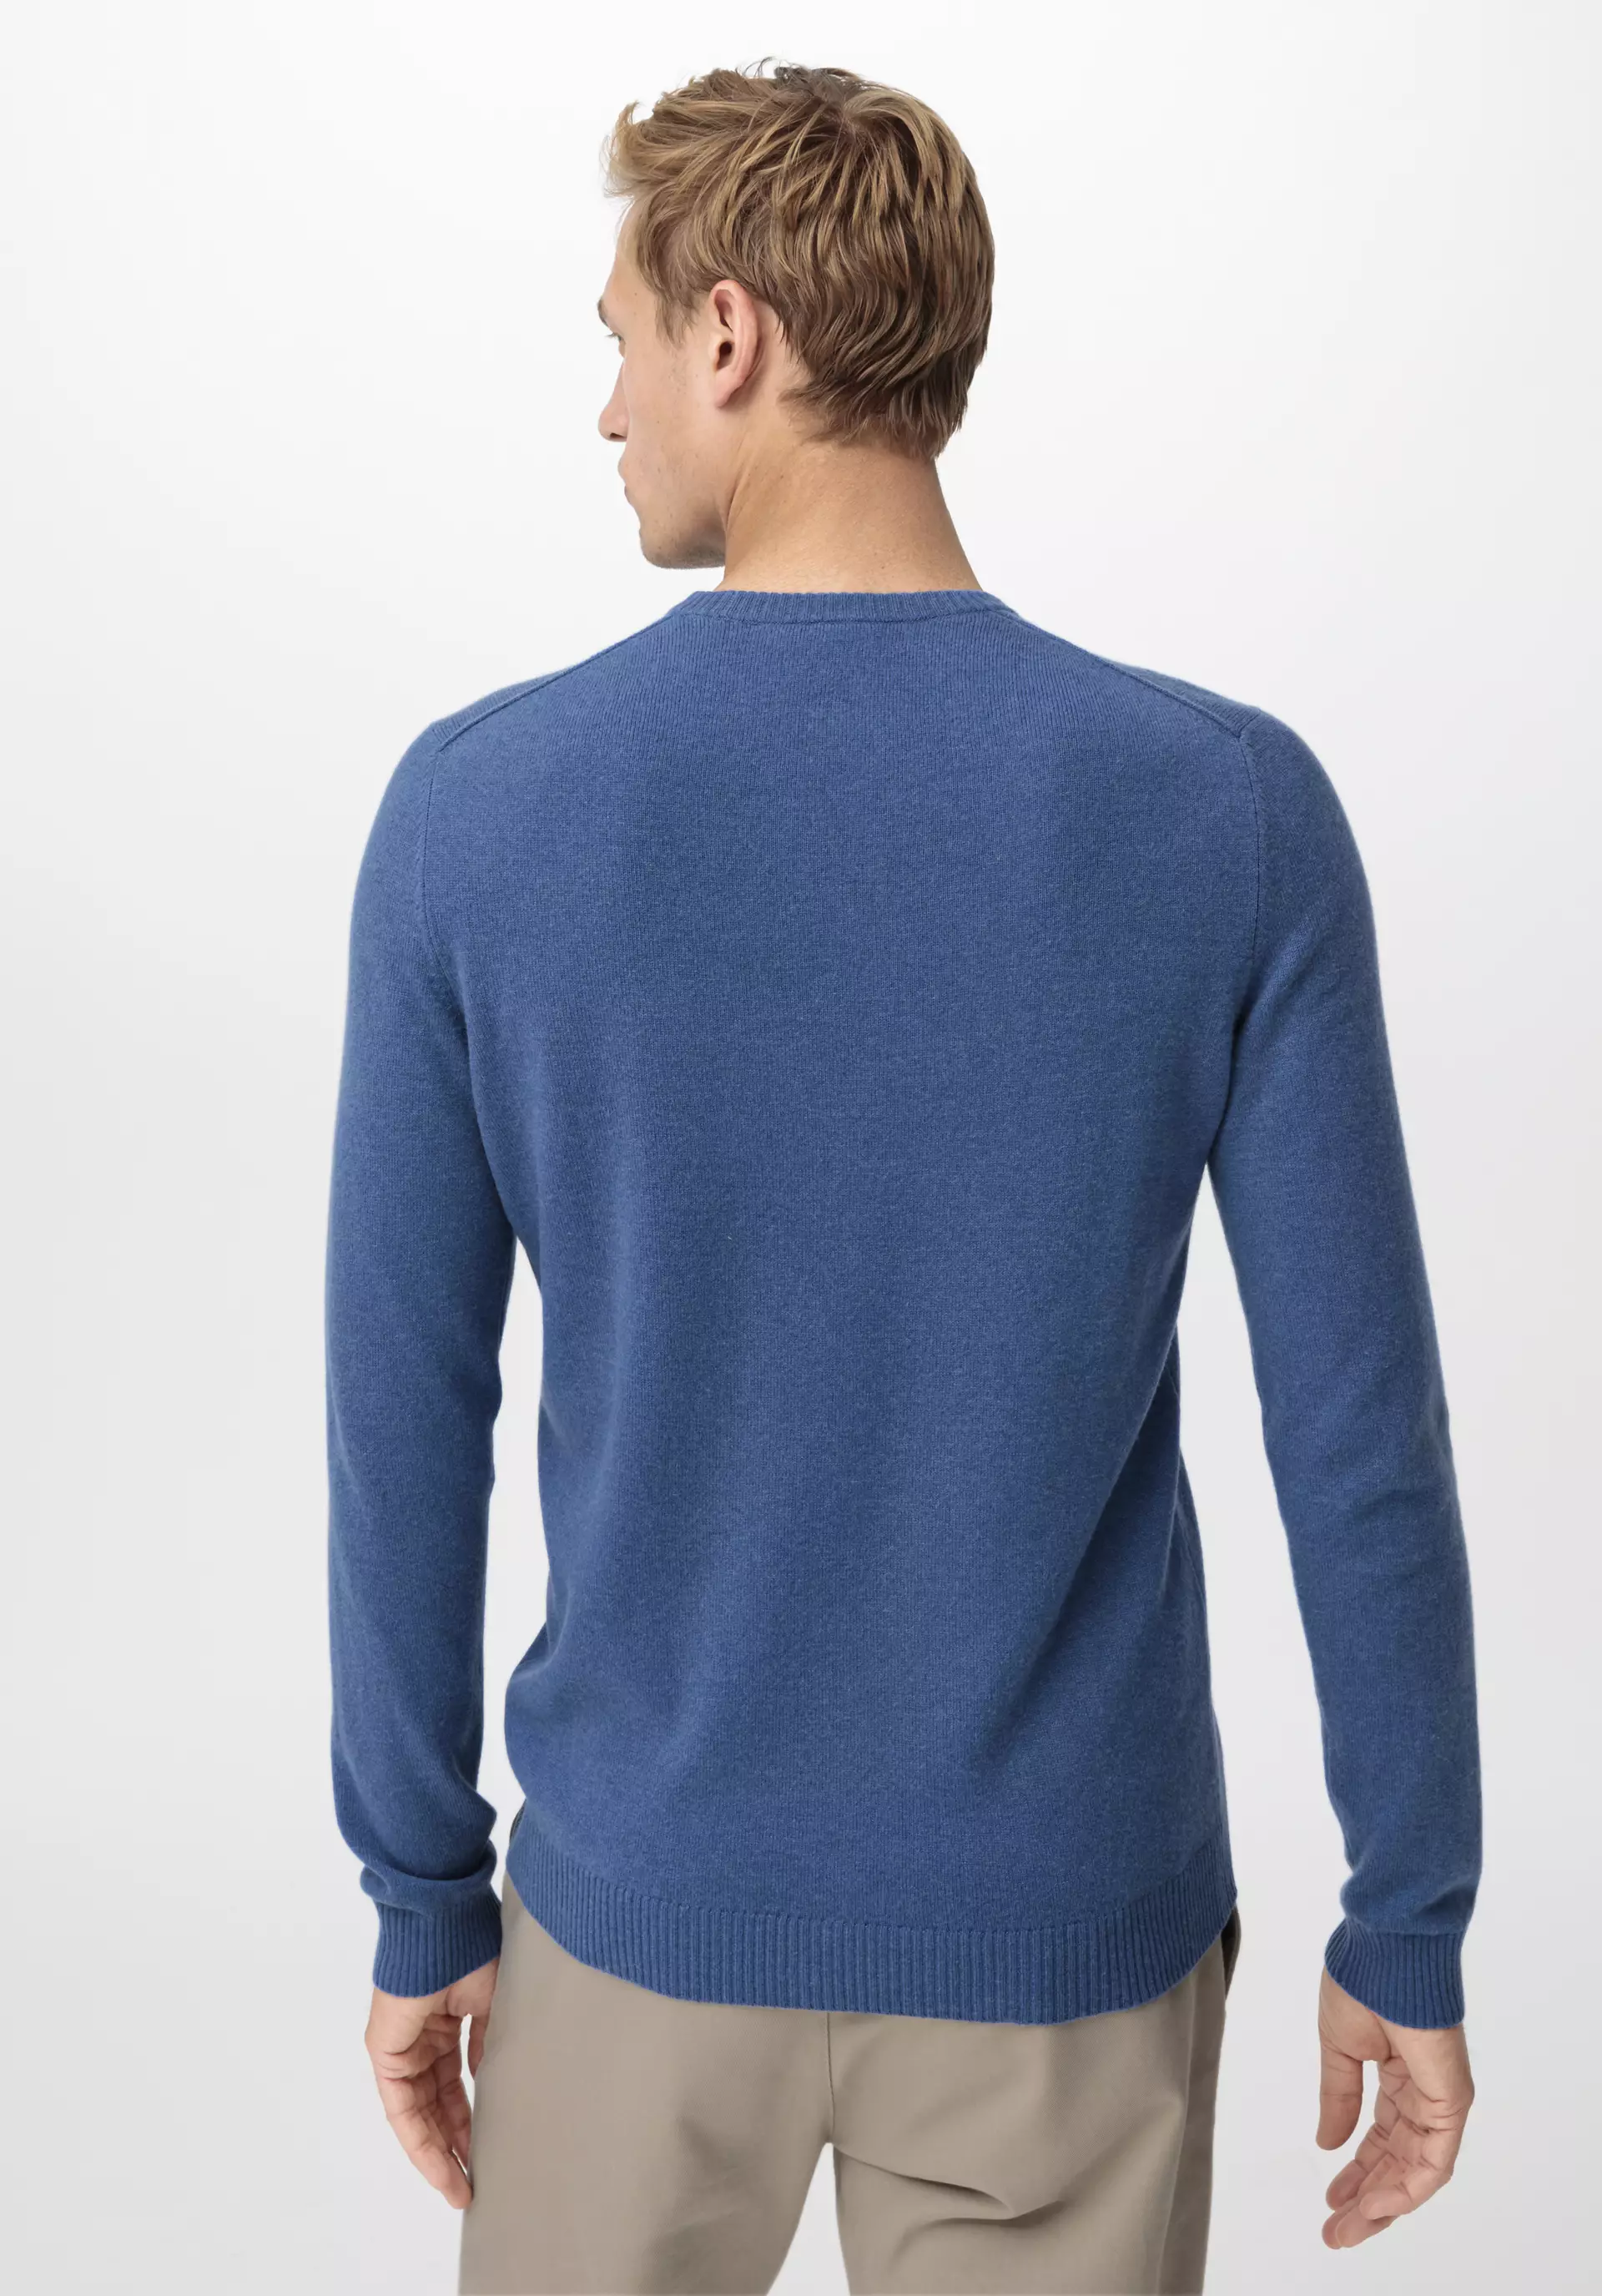 Virgin wool with cashmere 45822 sweater